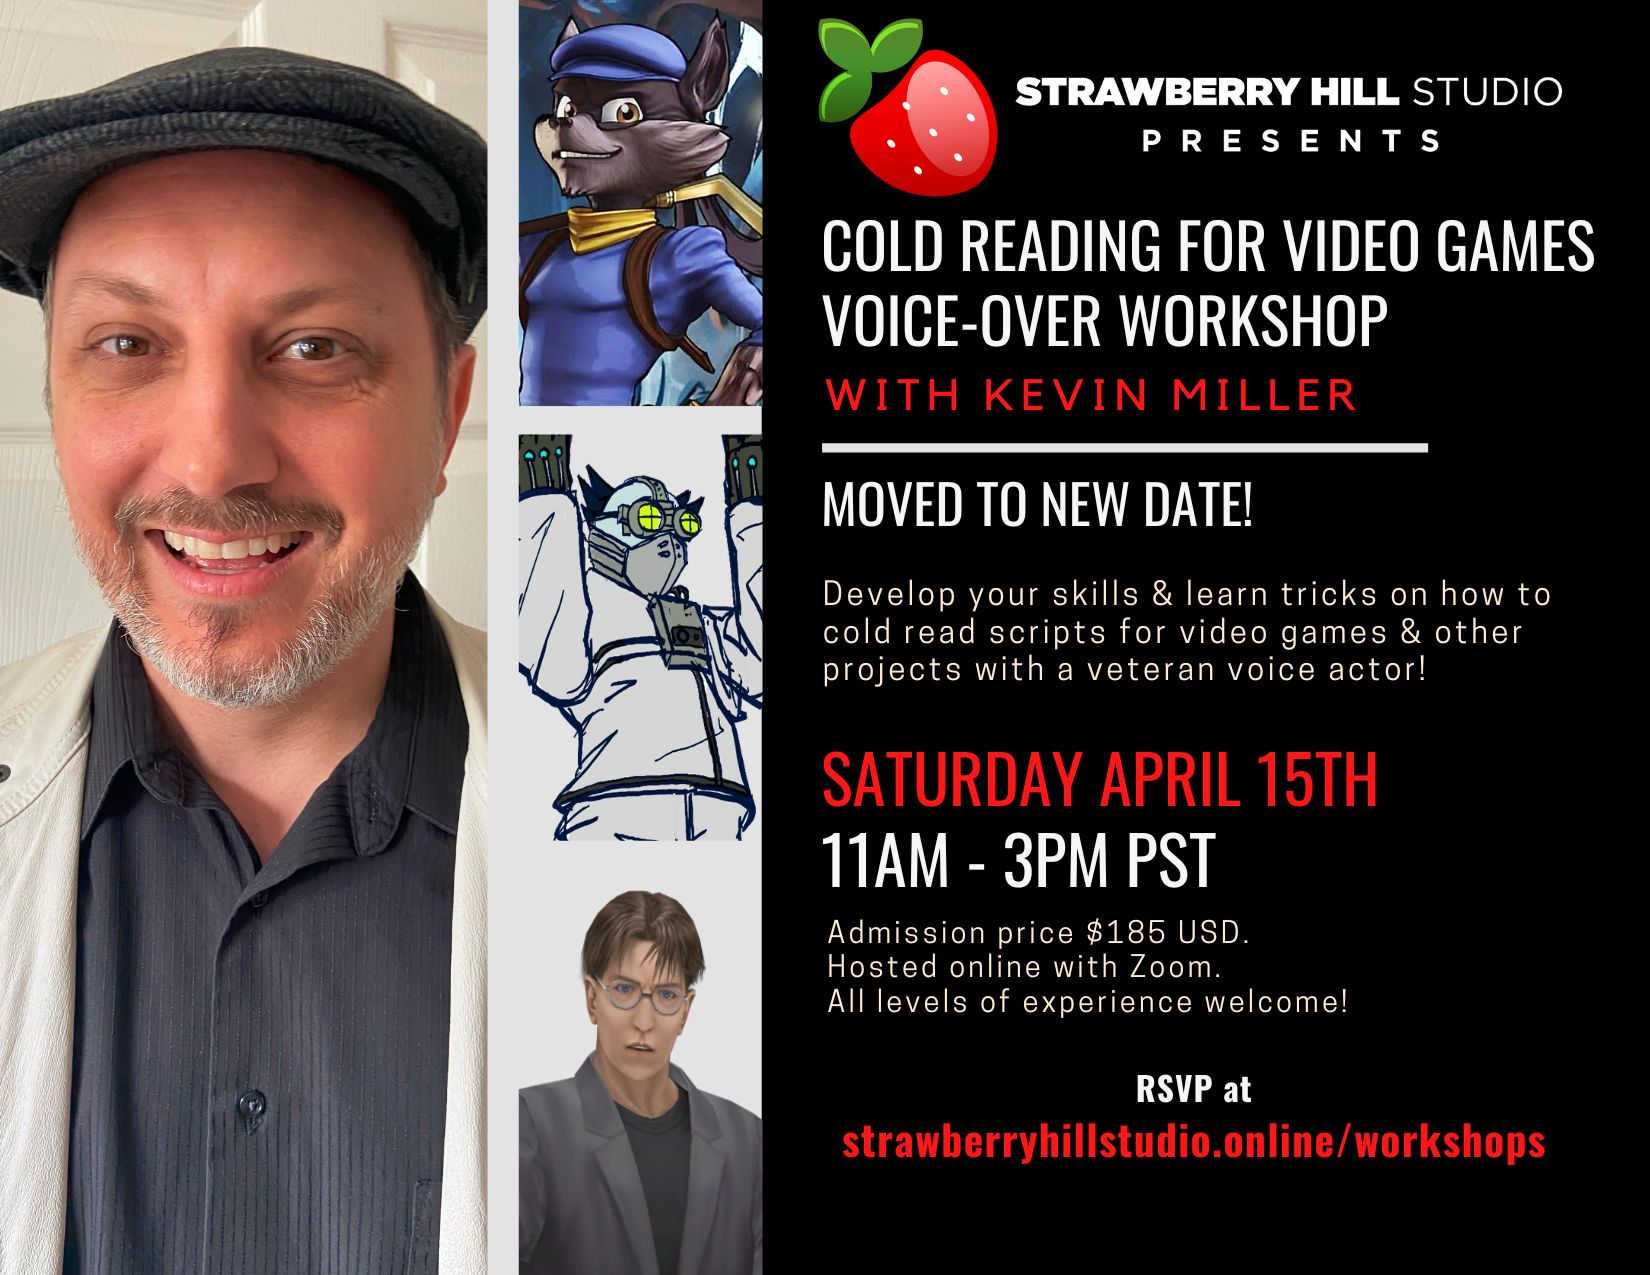 NEW DATE - Cold Reading for Video Games: Voice-Over Workshop w/ Kevin Miller